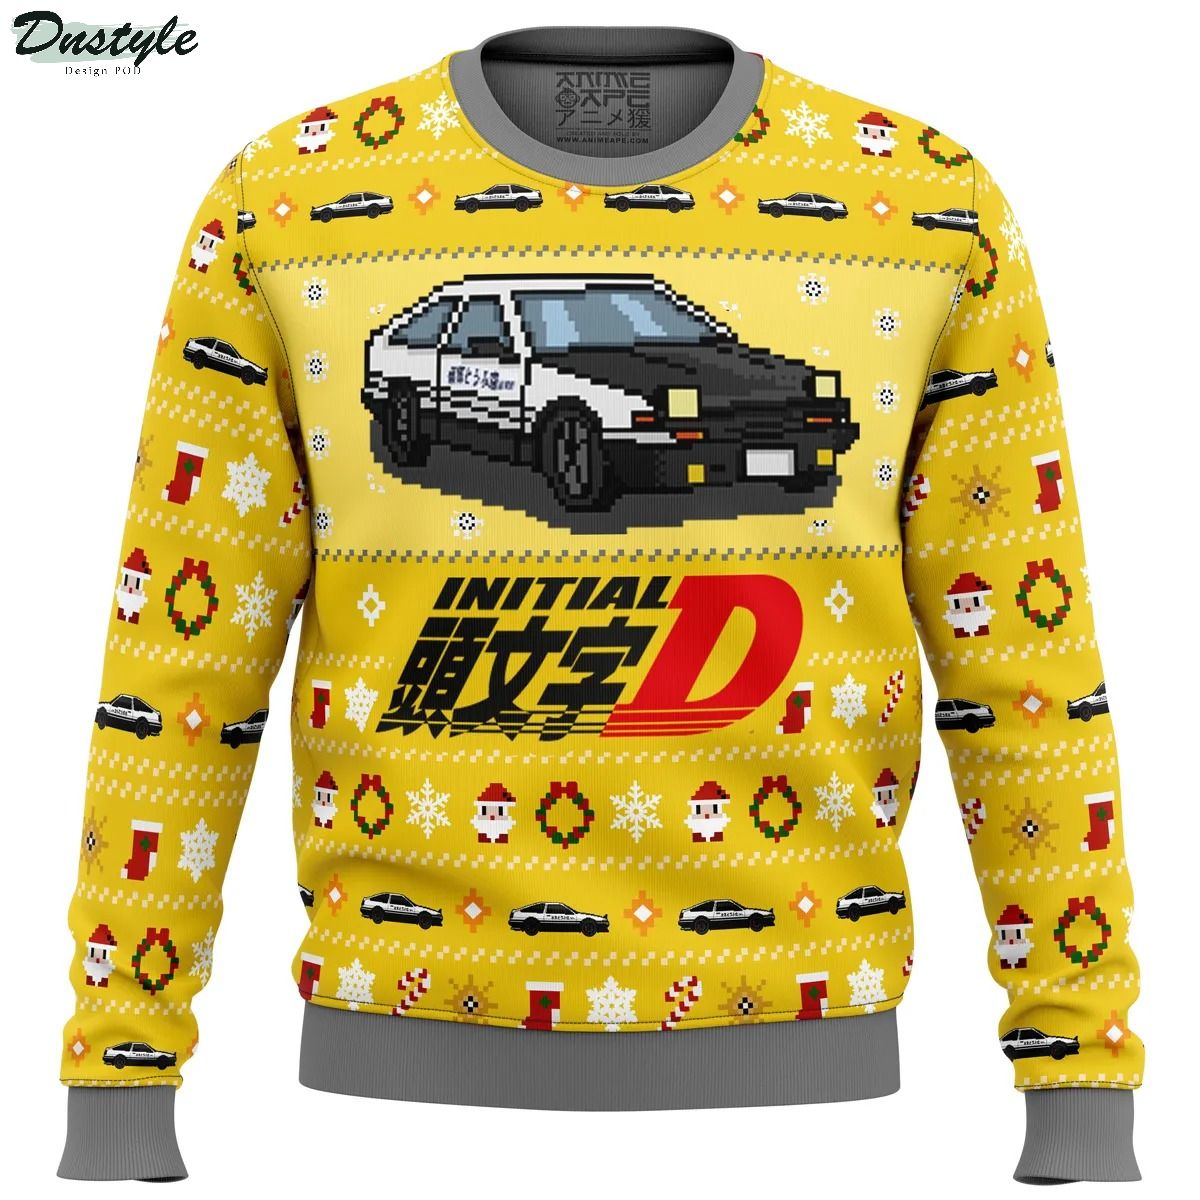 Initial D Classic Toyota Car Ugly Christmas Sweater